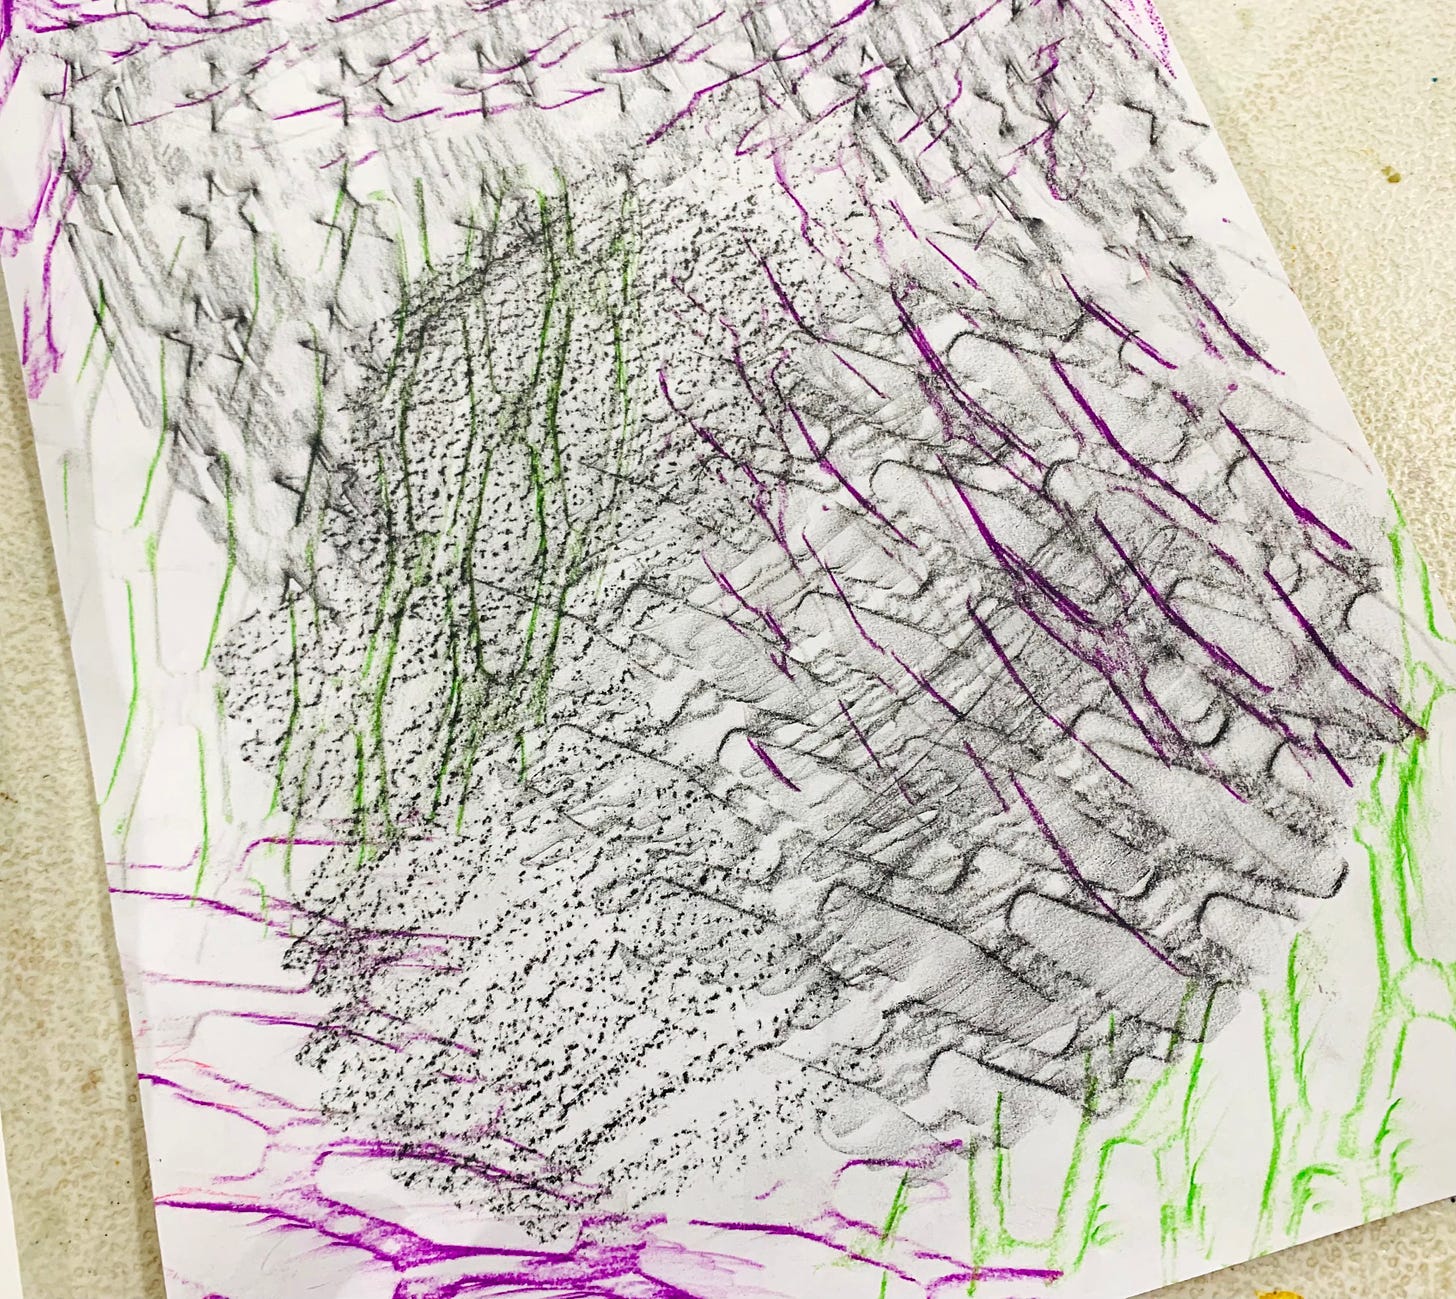 A white sheet of paper with rubbings of rectangular shapes in magenta, grey/black, and lime green.